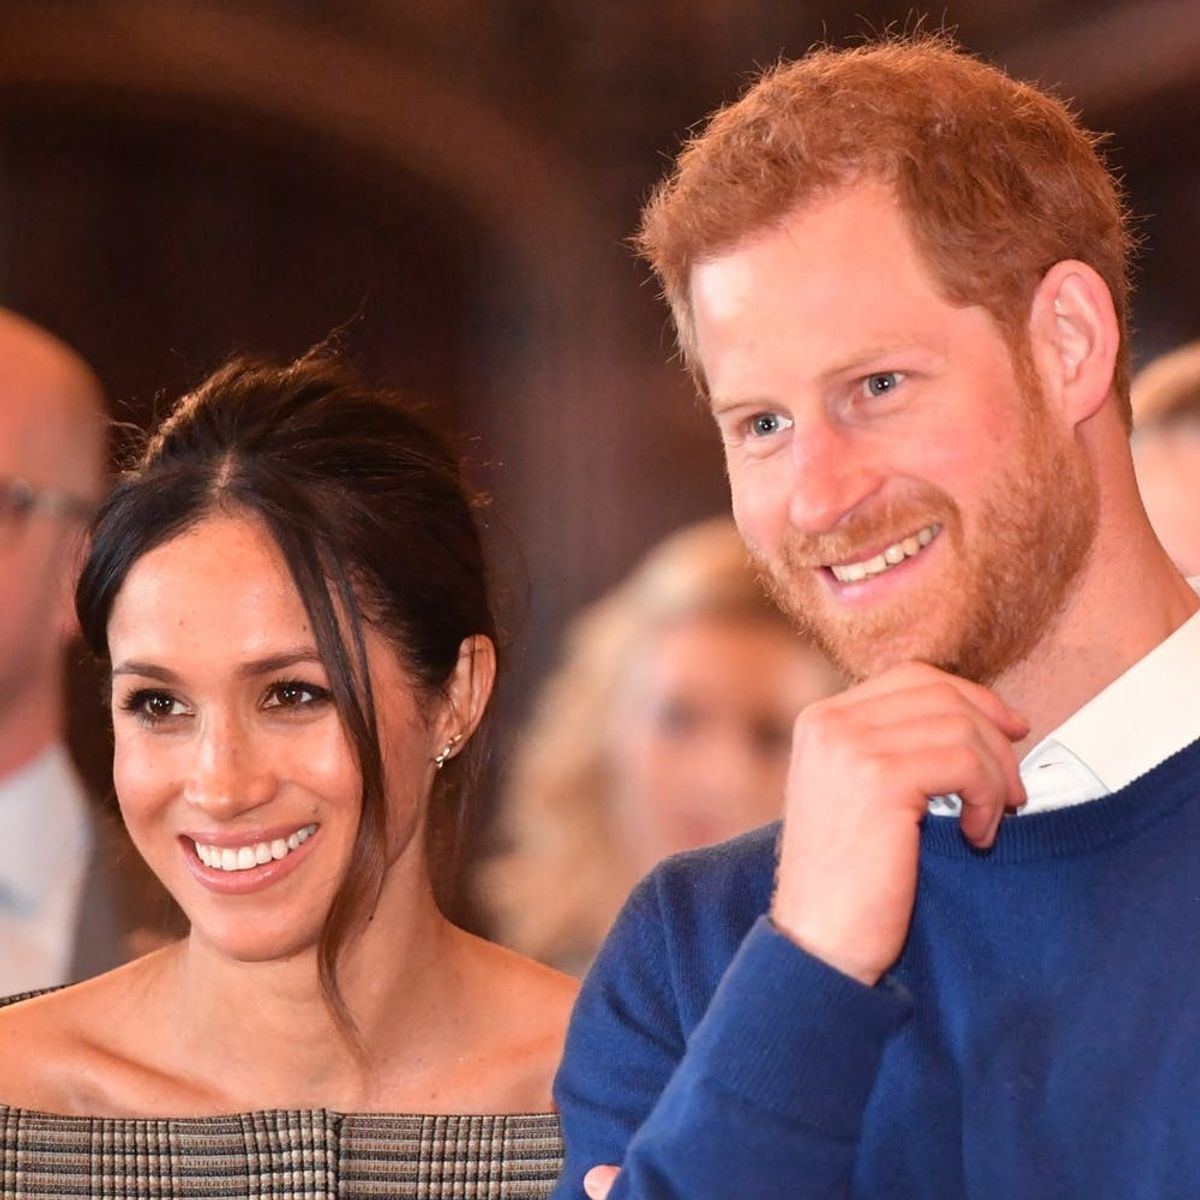 Meghan Markle and Prince Harry’s Wedding Will Include a Horse-Drawn Carriage Procession Through the Streets of Windsor